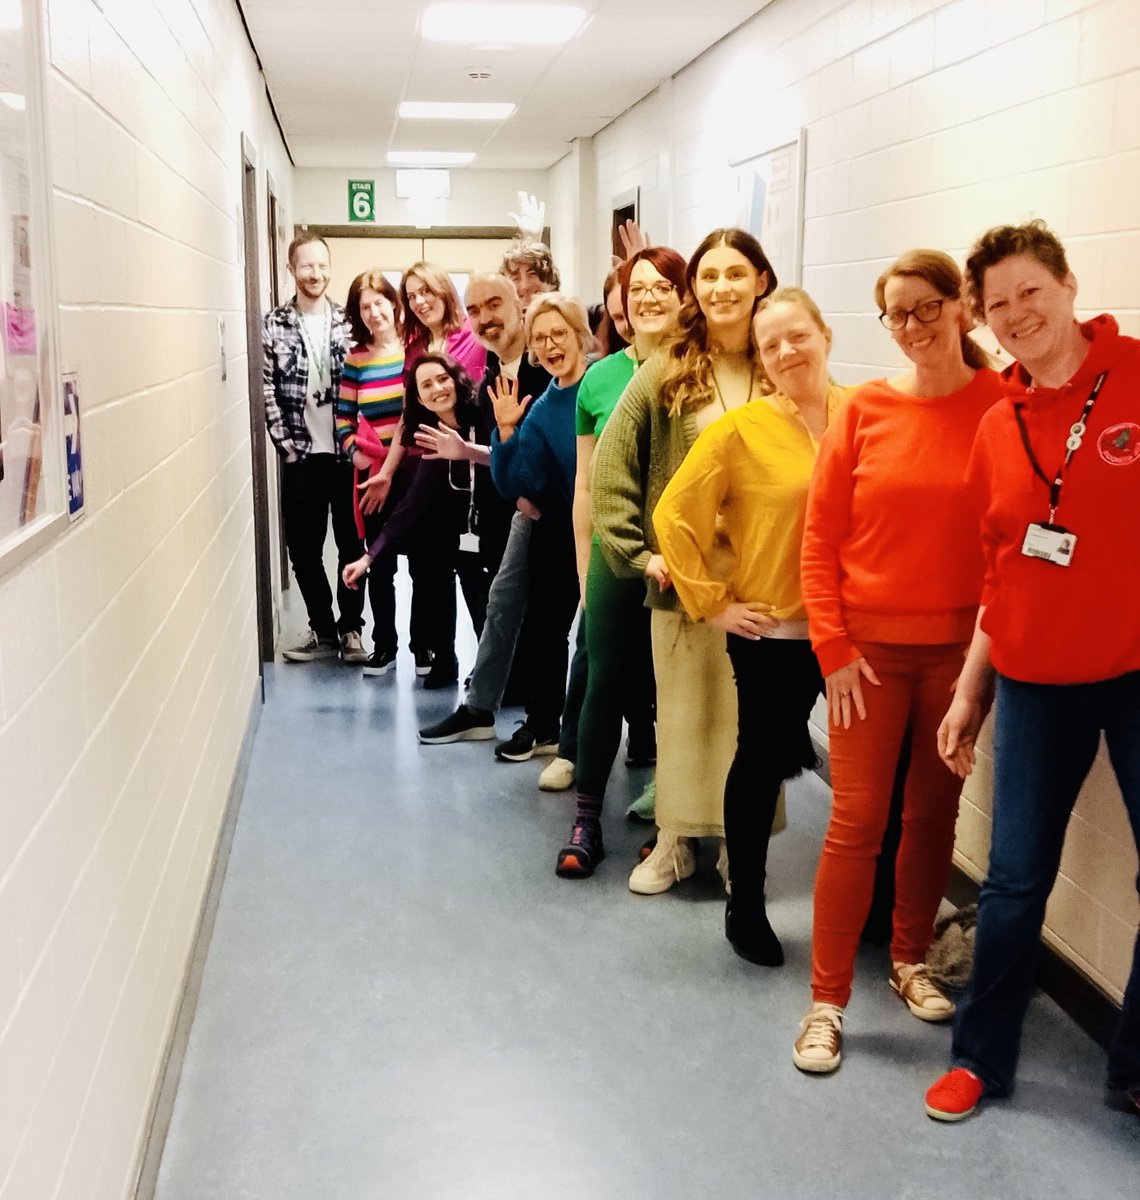 Yesterdays end of term dress down day was a colourful theme in honour of the Hindu festival of Holi. Of course the scientists have to attemp a visible light spectrum 🌈 @CraigmountHS @CHSequalities